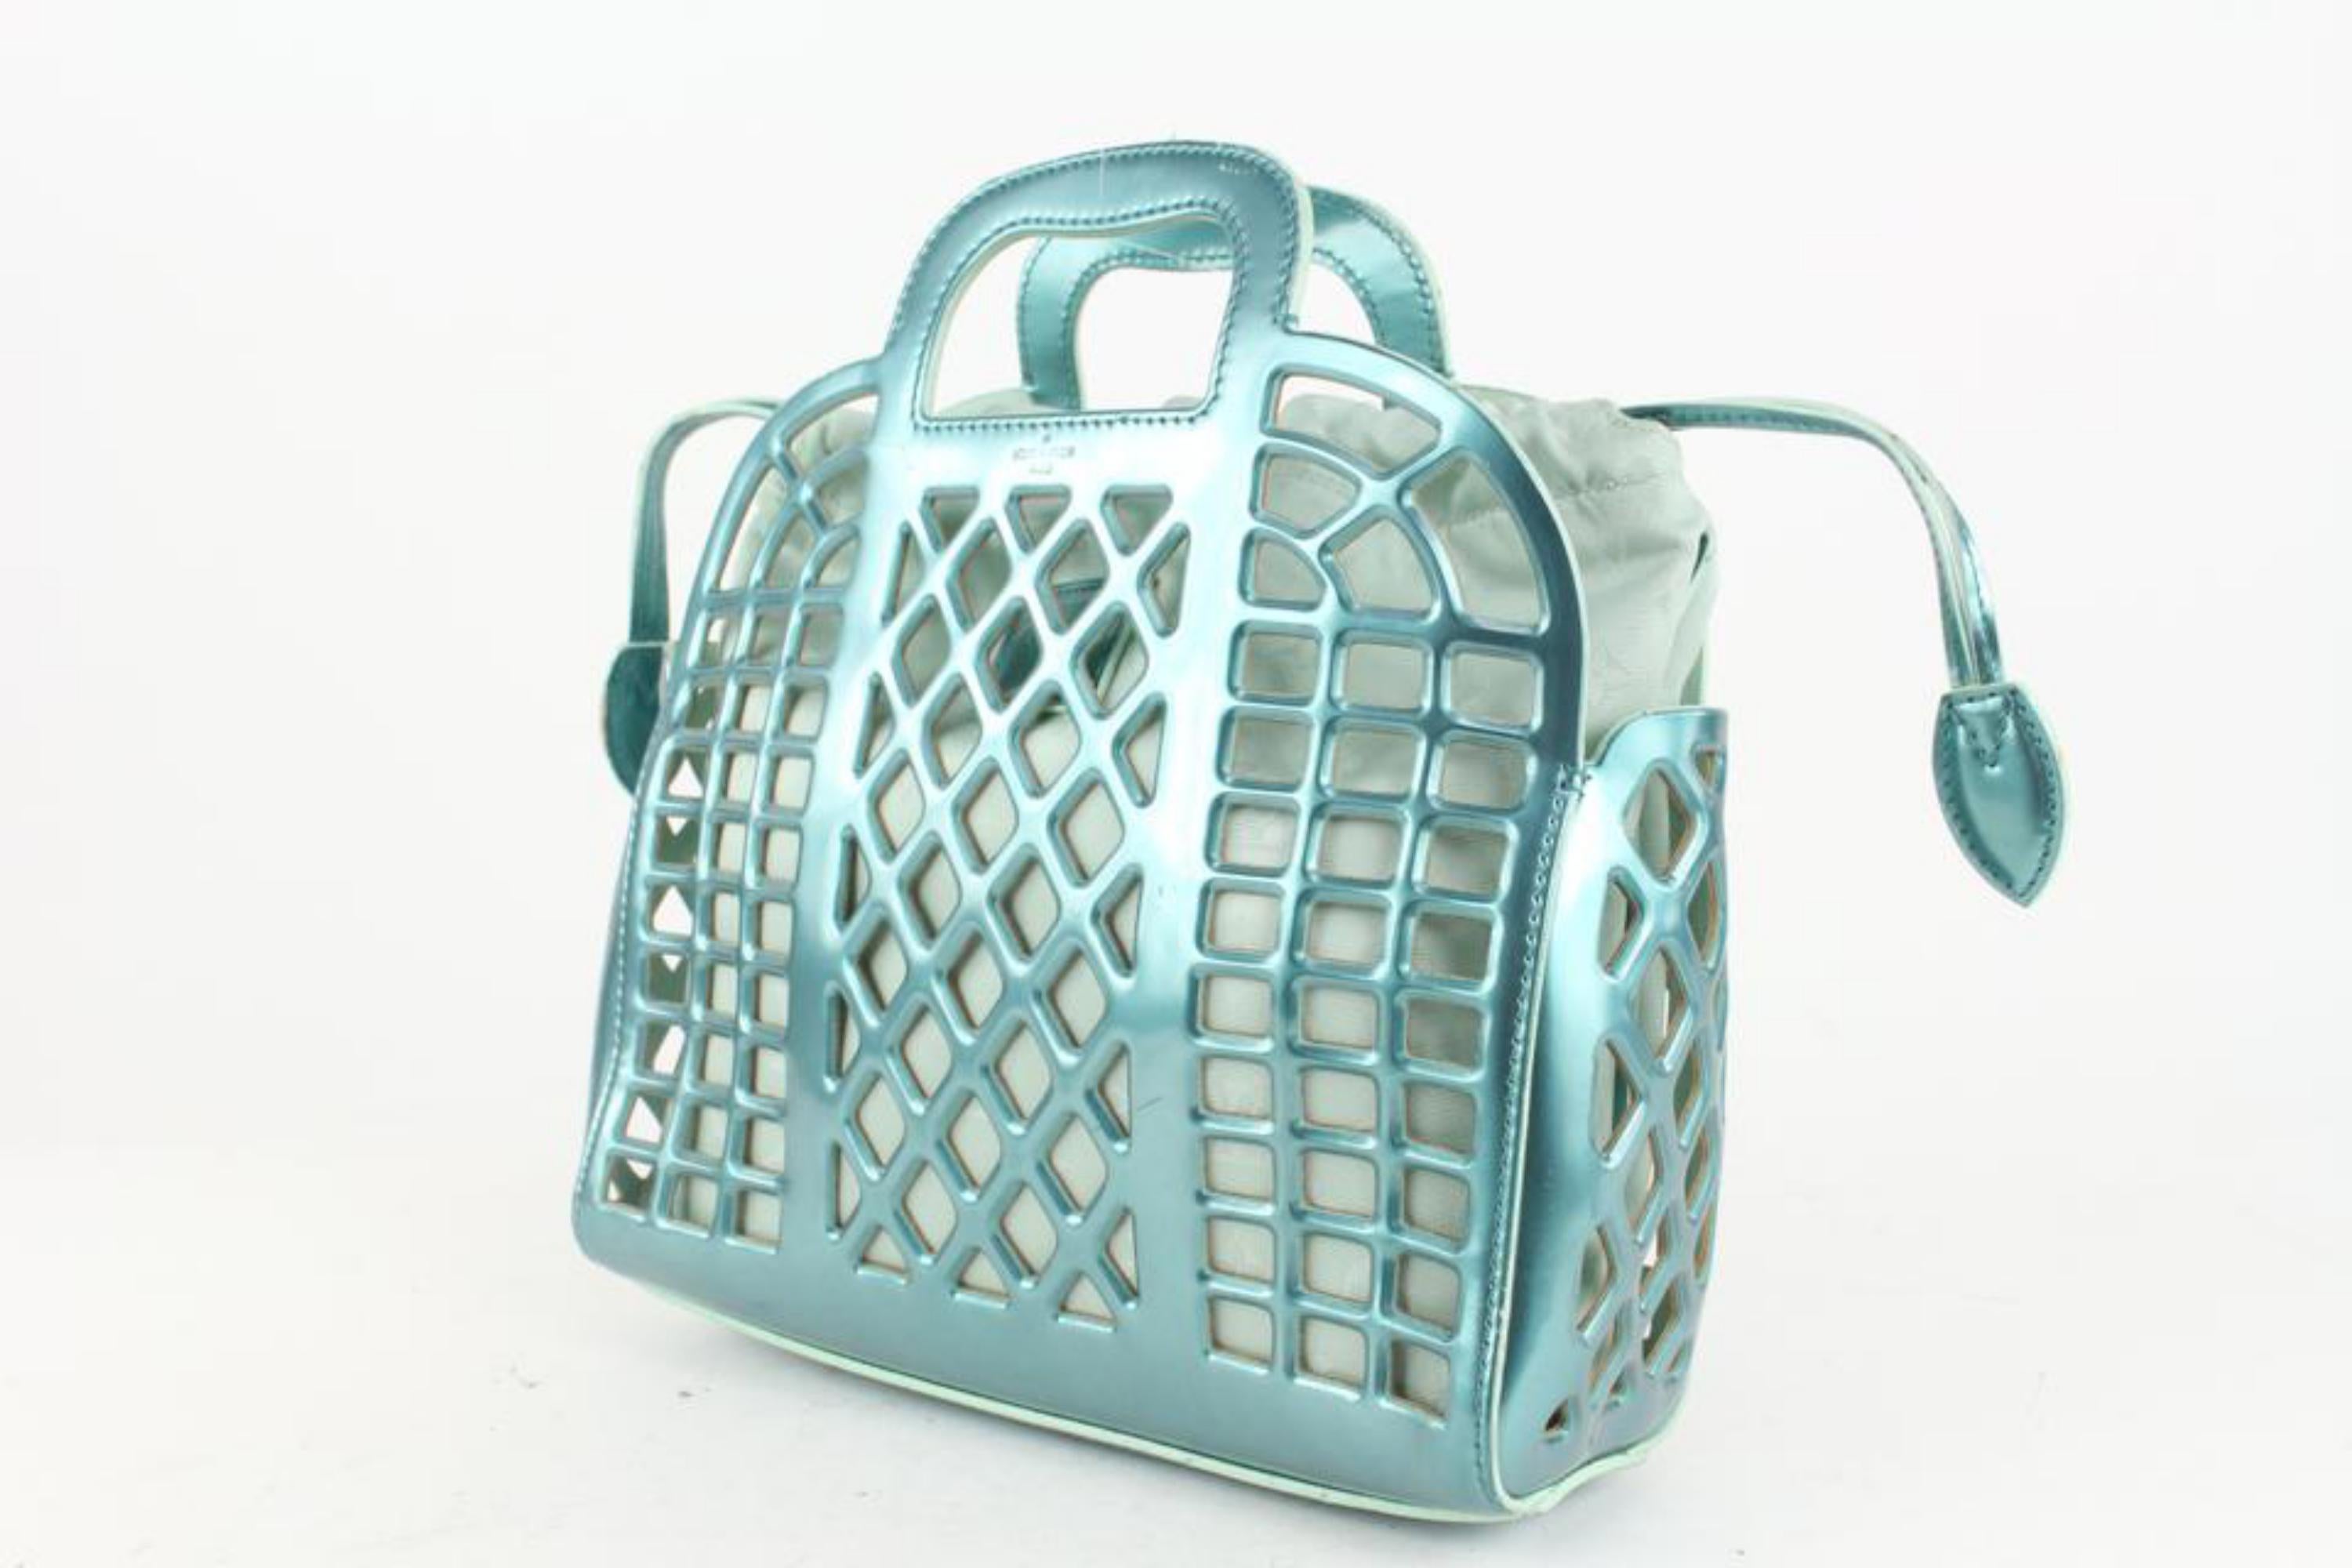 Louis Vuitton Limited Rare Turquoise Metallic Reef Patent Jelly Basket 1111lv32 3